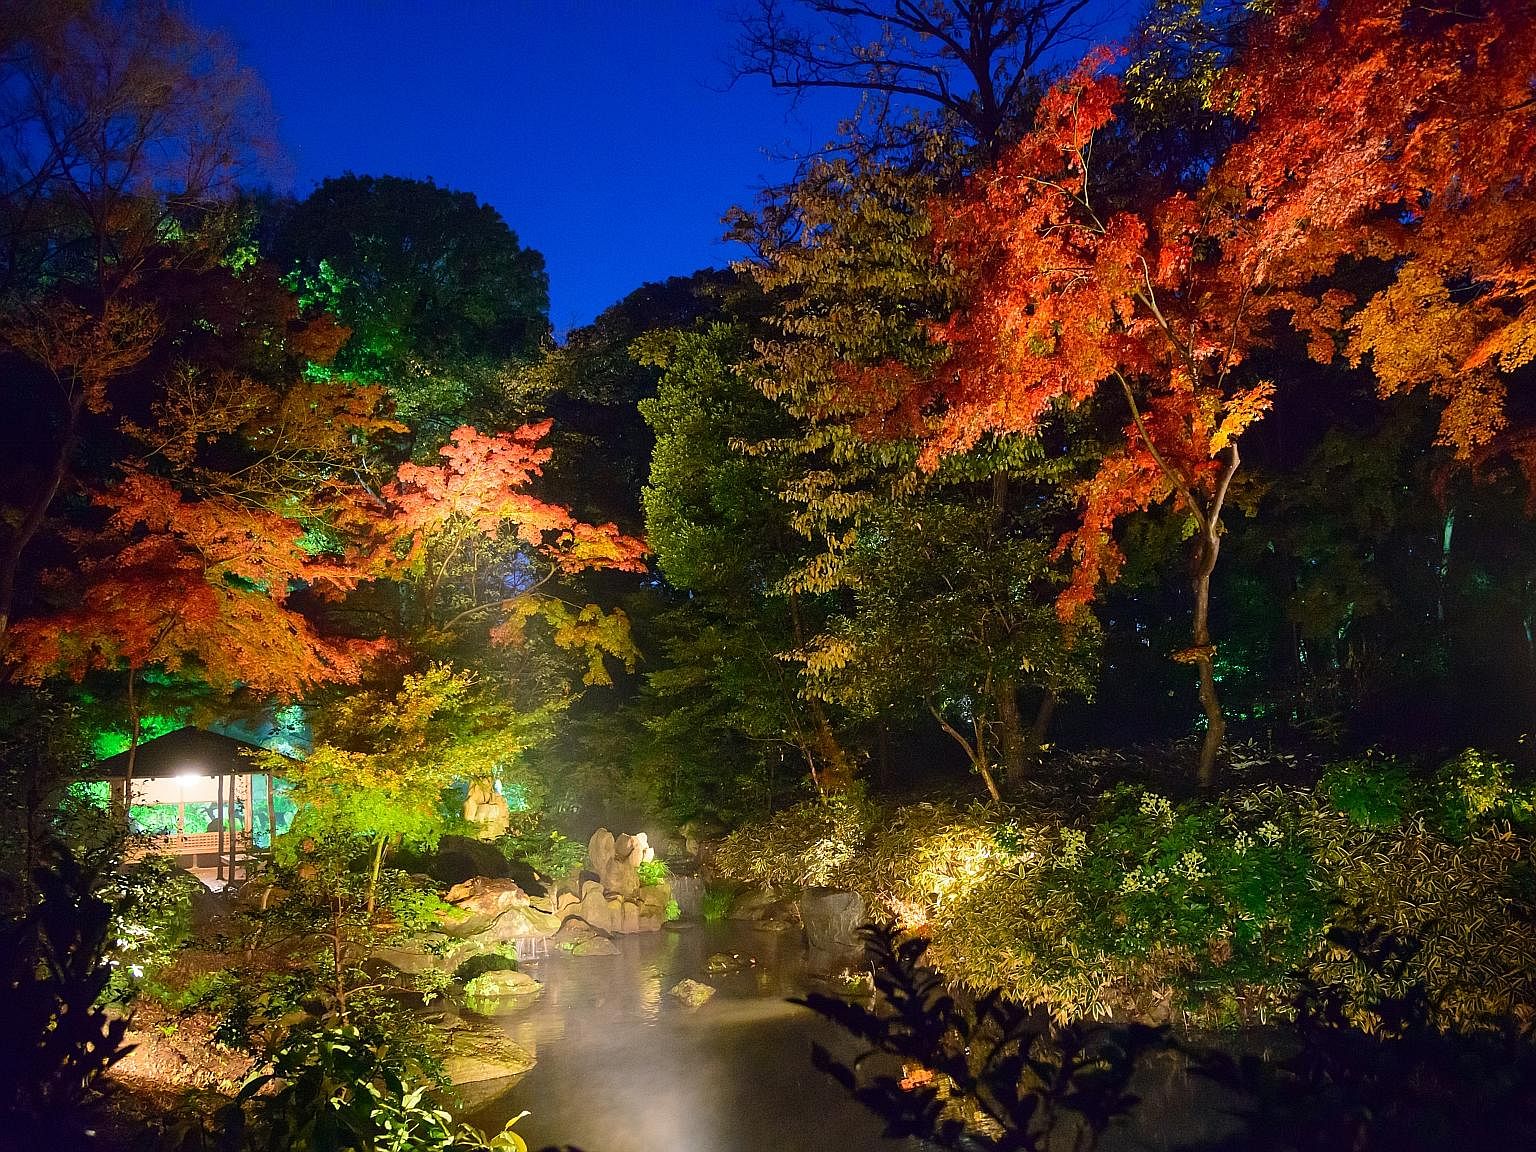 Hike among autumn colours on the trail towards Mount Asahi-dake in Daisetsuzan National Park. Forested Minoo Park's hidden attraction is its 33m waterfall. In autumn, the Sagano Scenic Railway sightseeing train in Kyoto takes passengers through a lan